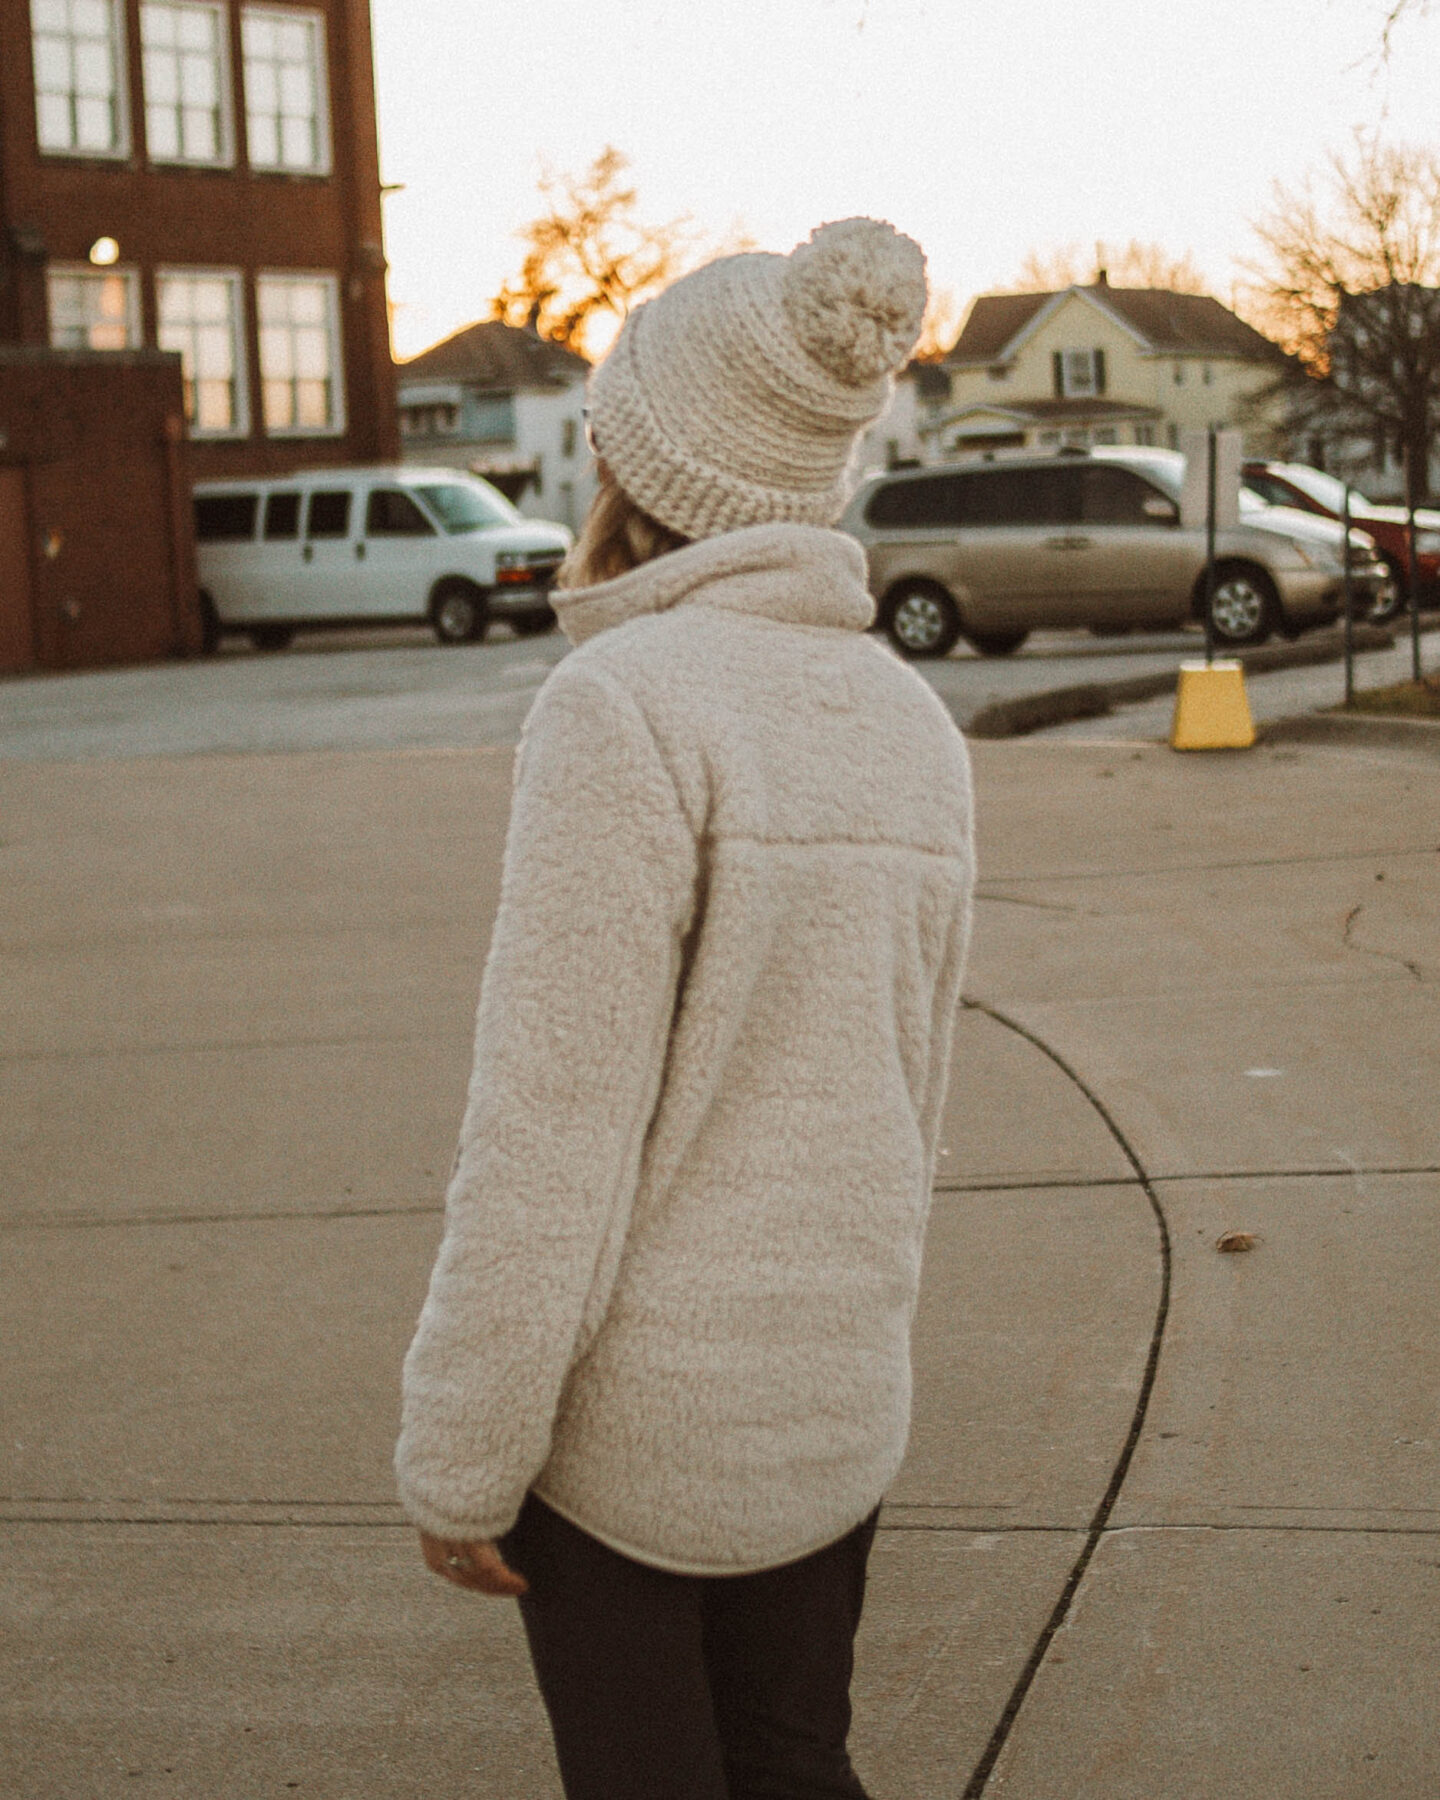 cozy, stay at home outfits abercrombie fleece pullover, joggers, legging outfits, white tennis shoe, pom hat